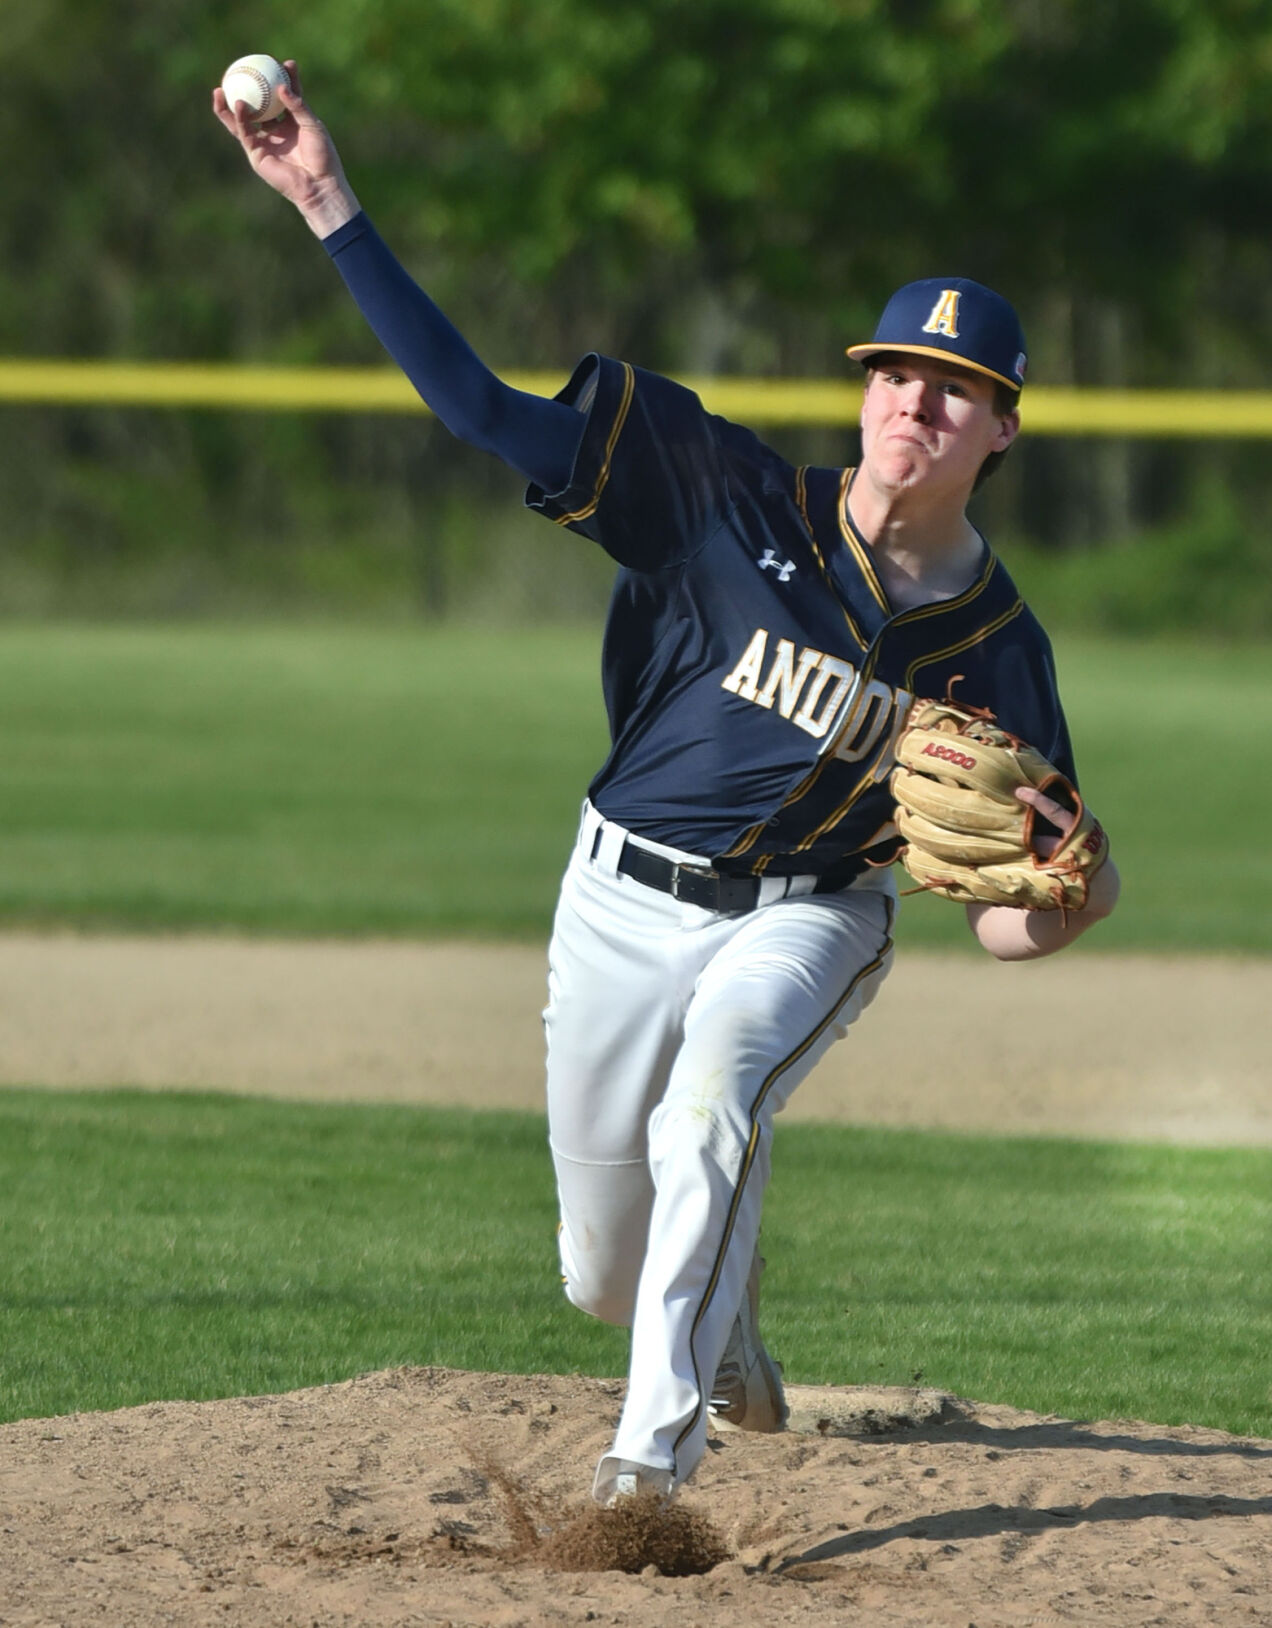 MVC Baseball Preview 2023: Andover and Central Catholic Lead with Key Players Departing